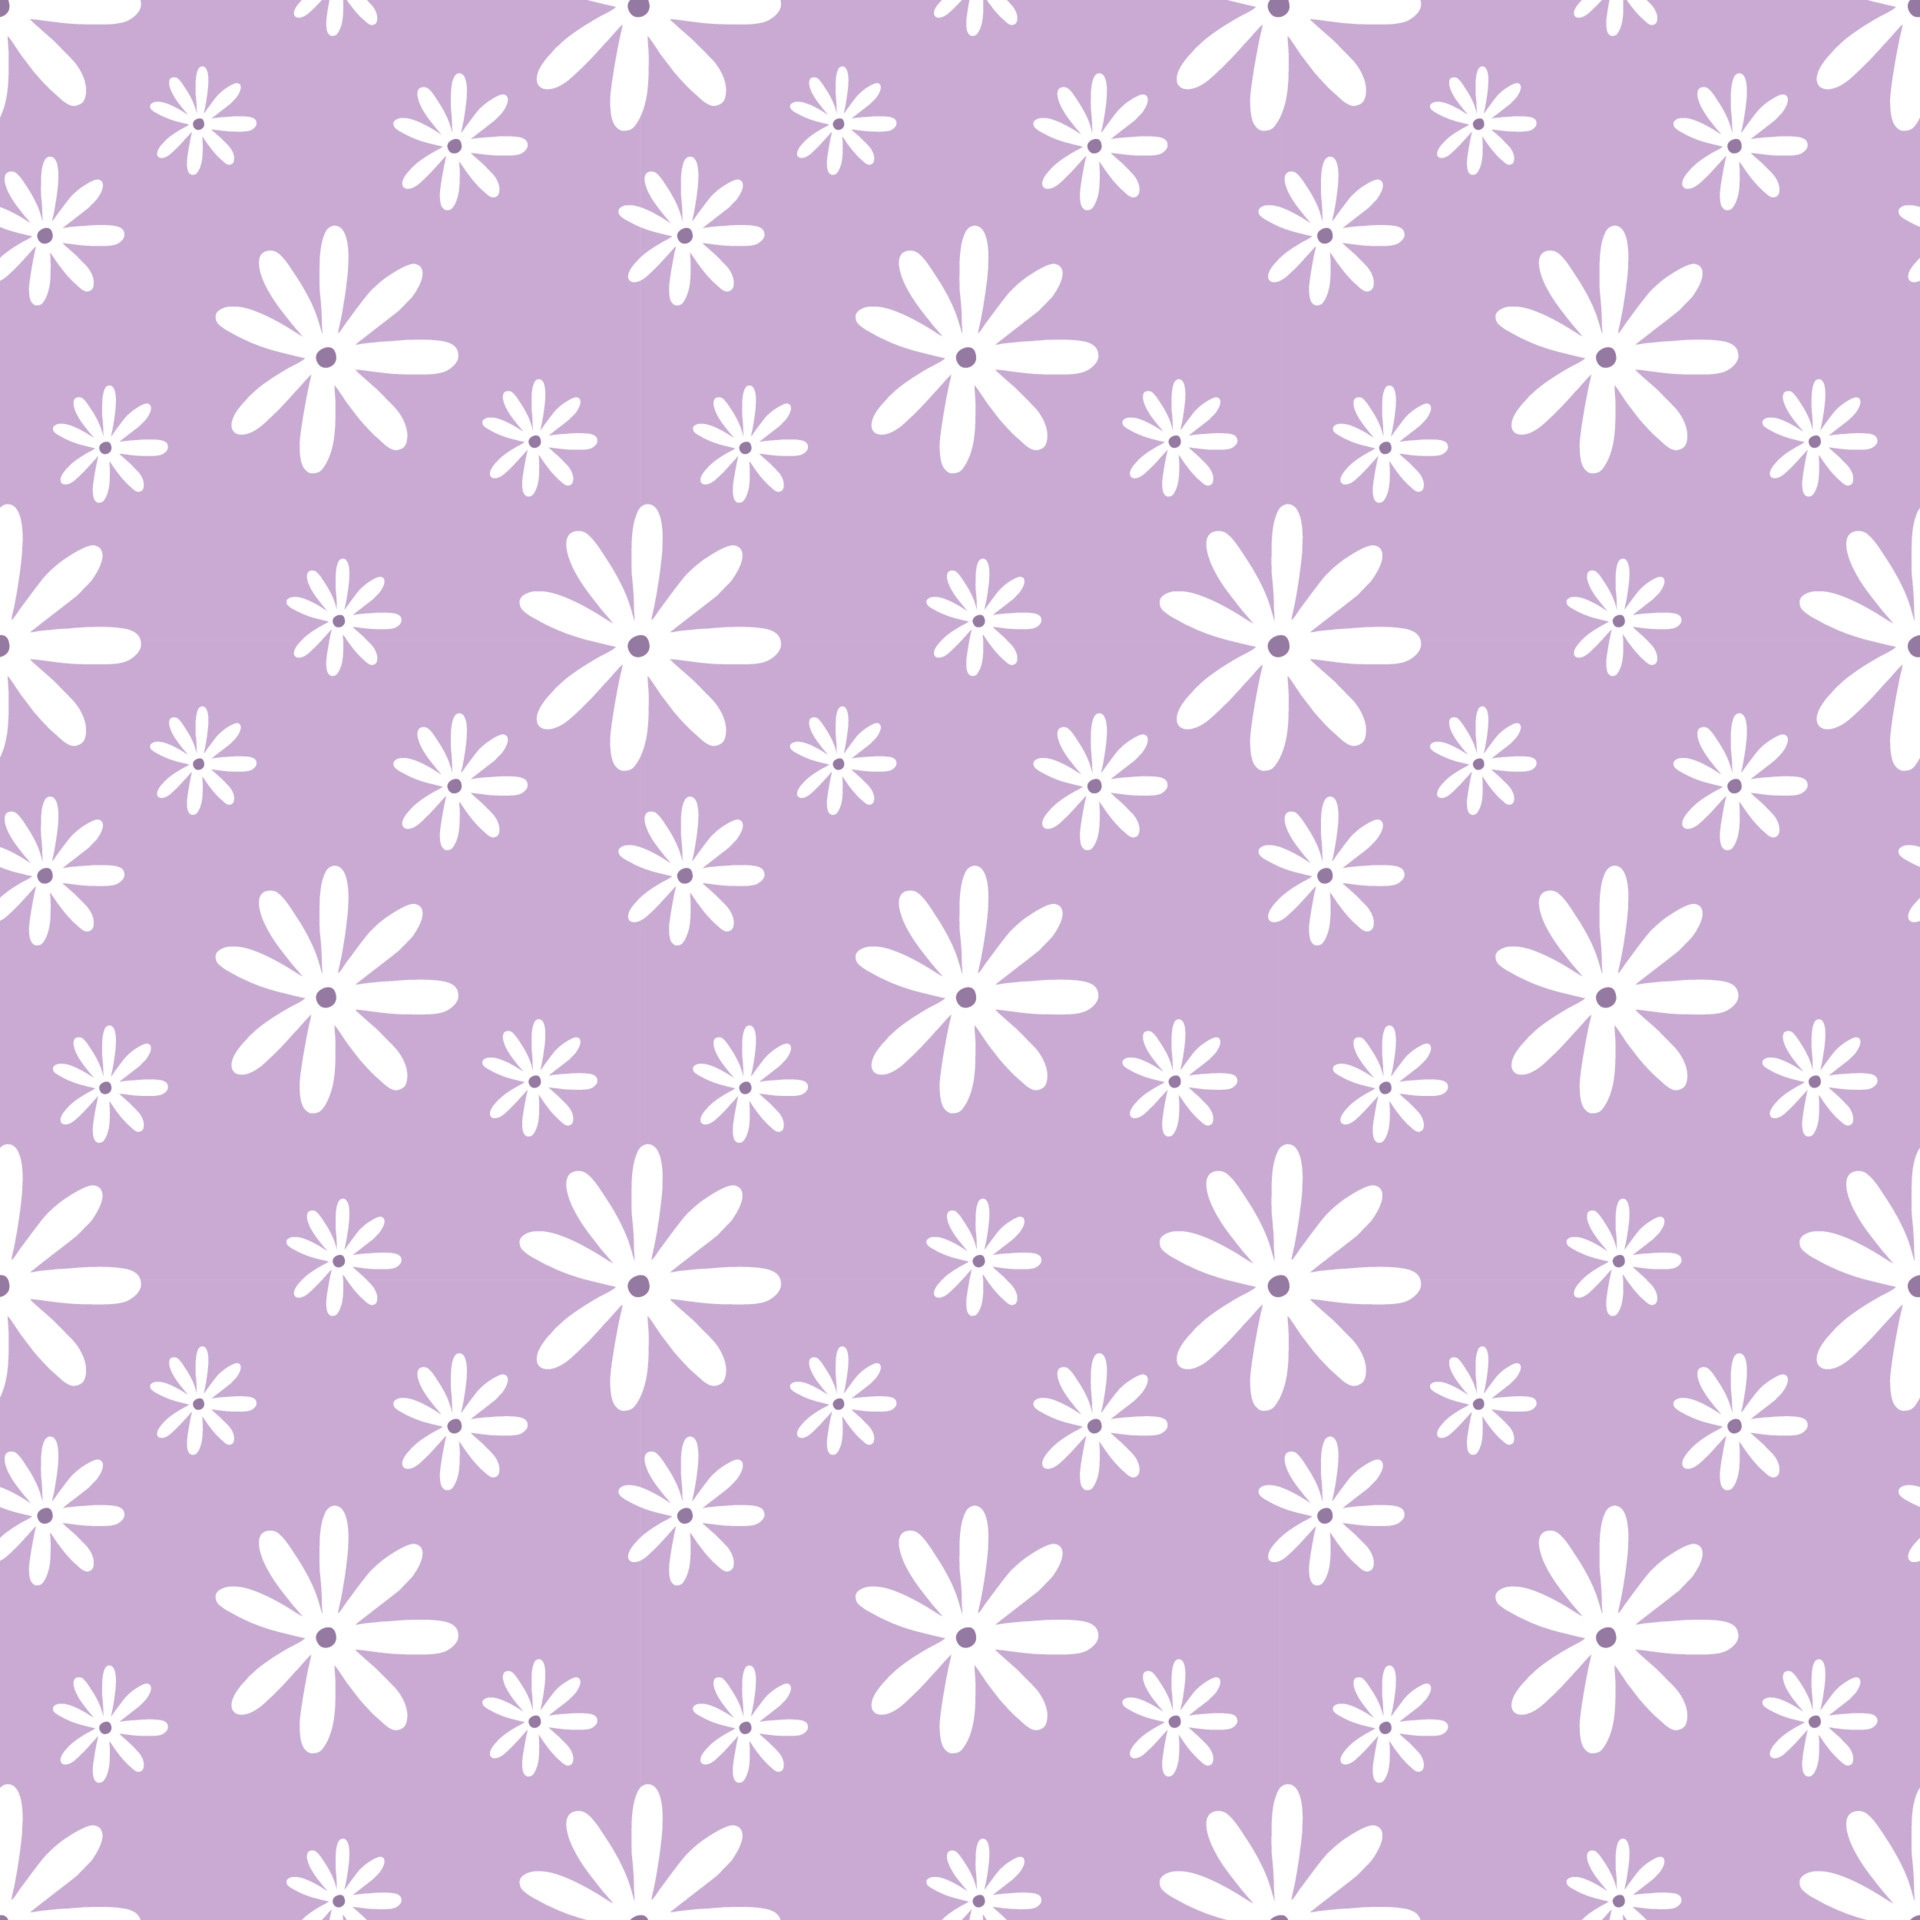 1920x1920 Seamless pattern with cute flowers on purple background. Wallpaper for sewing clothes, printing on fabric and packaging paper. Daisy in style of doodle. 4848719 Vector Art